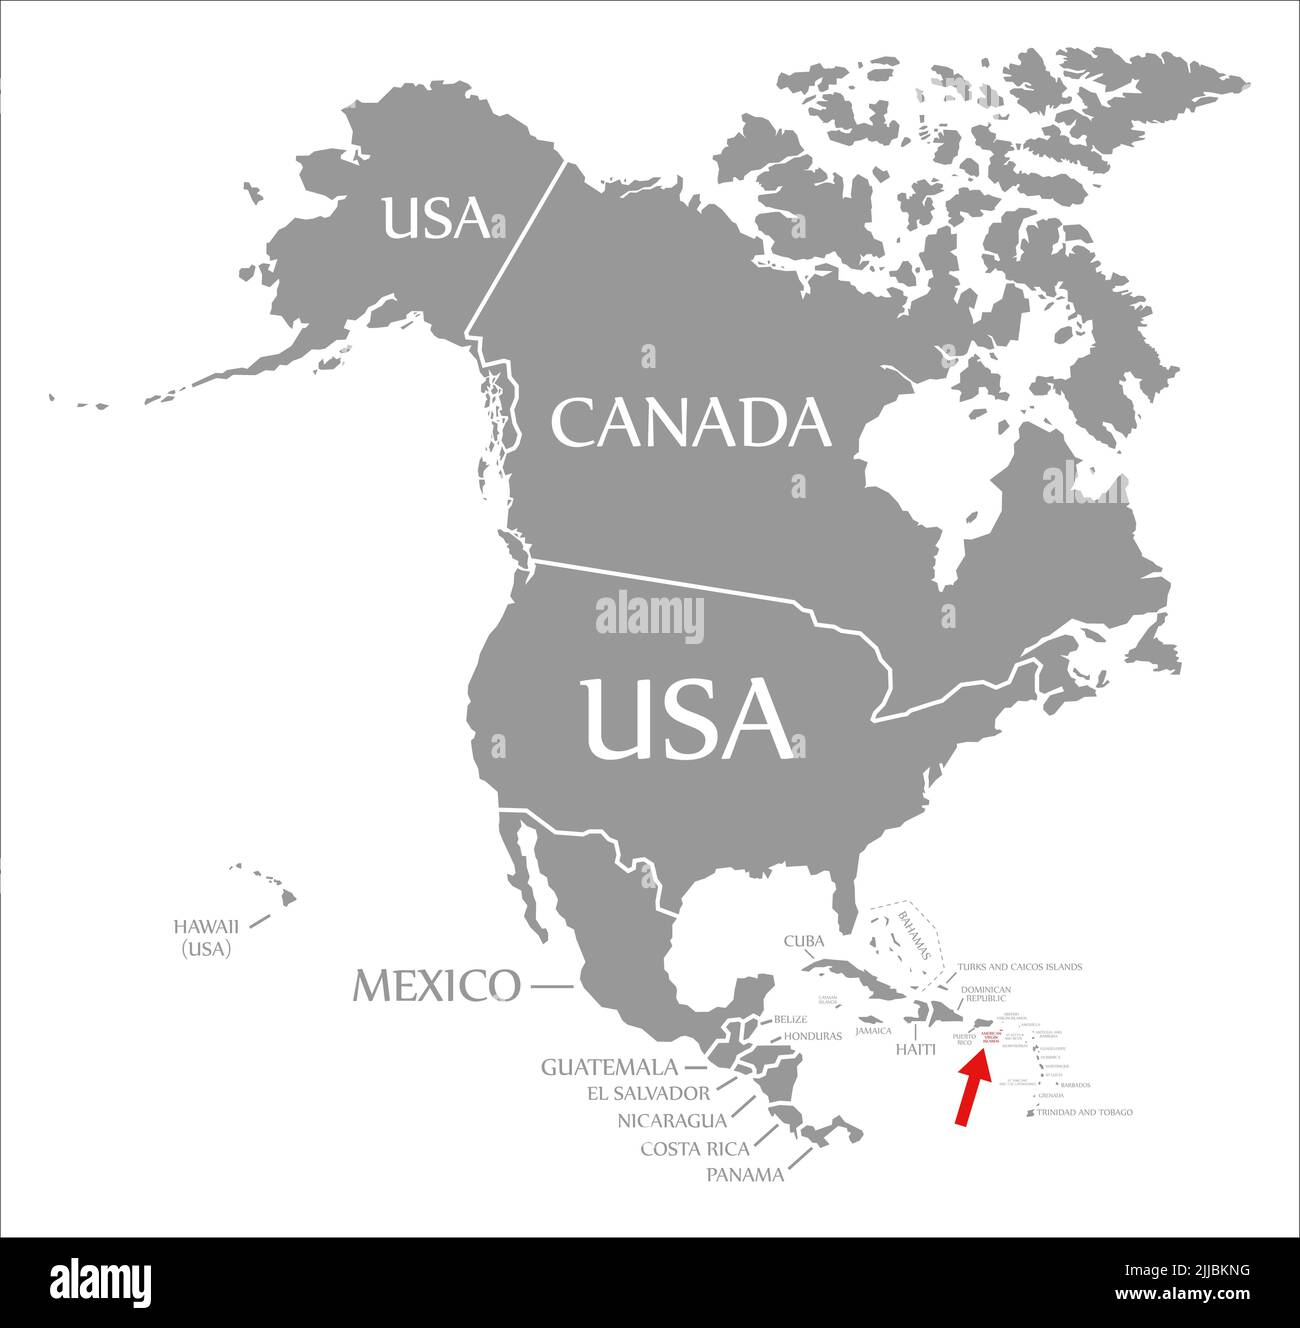 American Virgin Islands red highlighted in map of North America Stock Photo